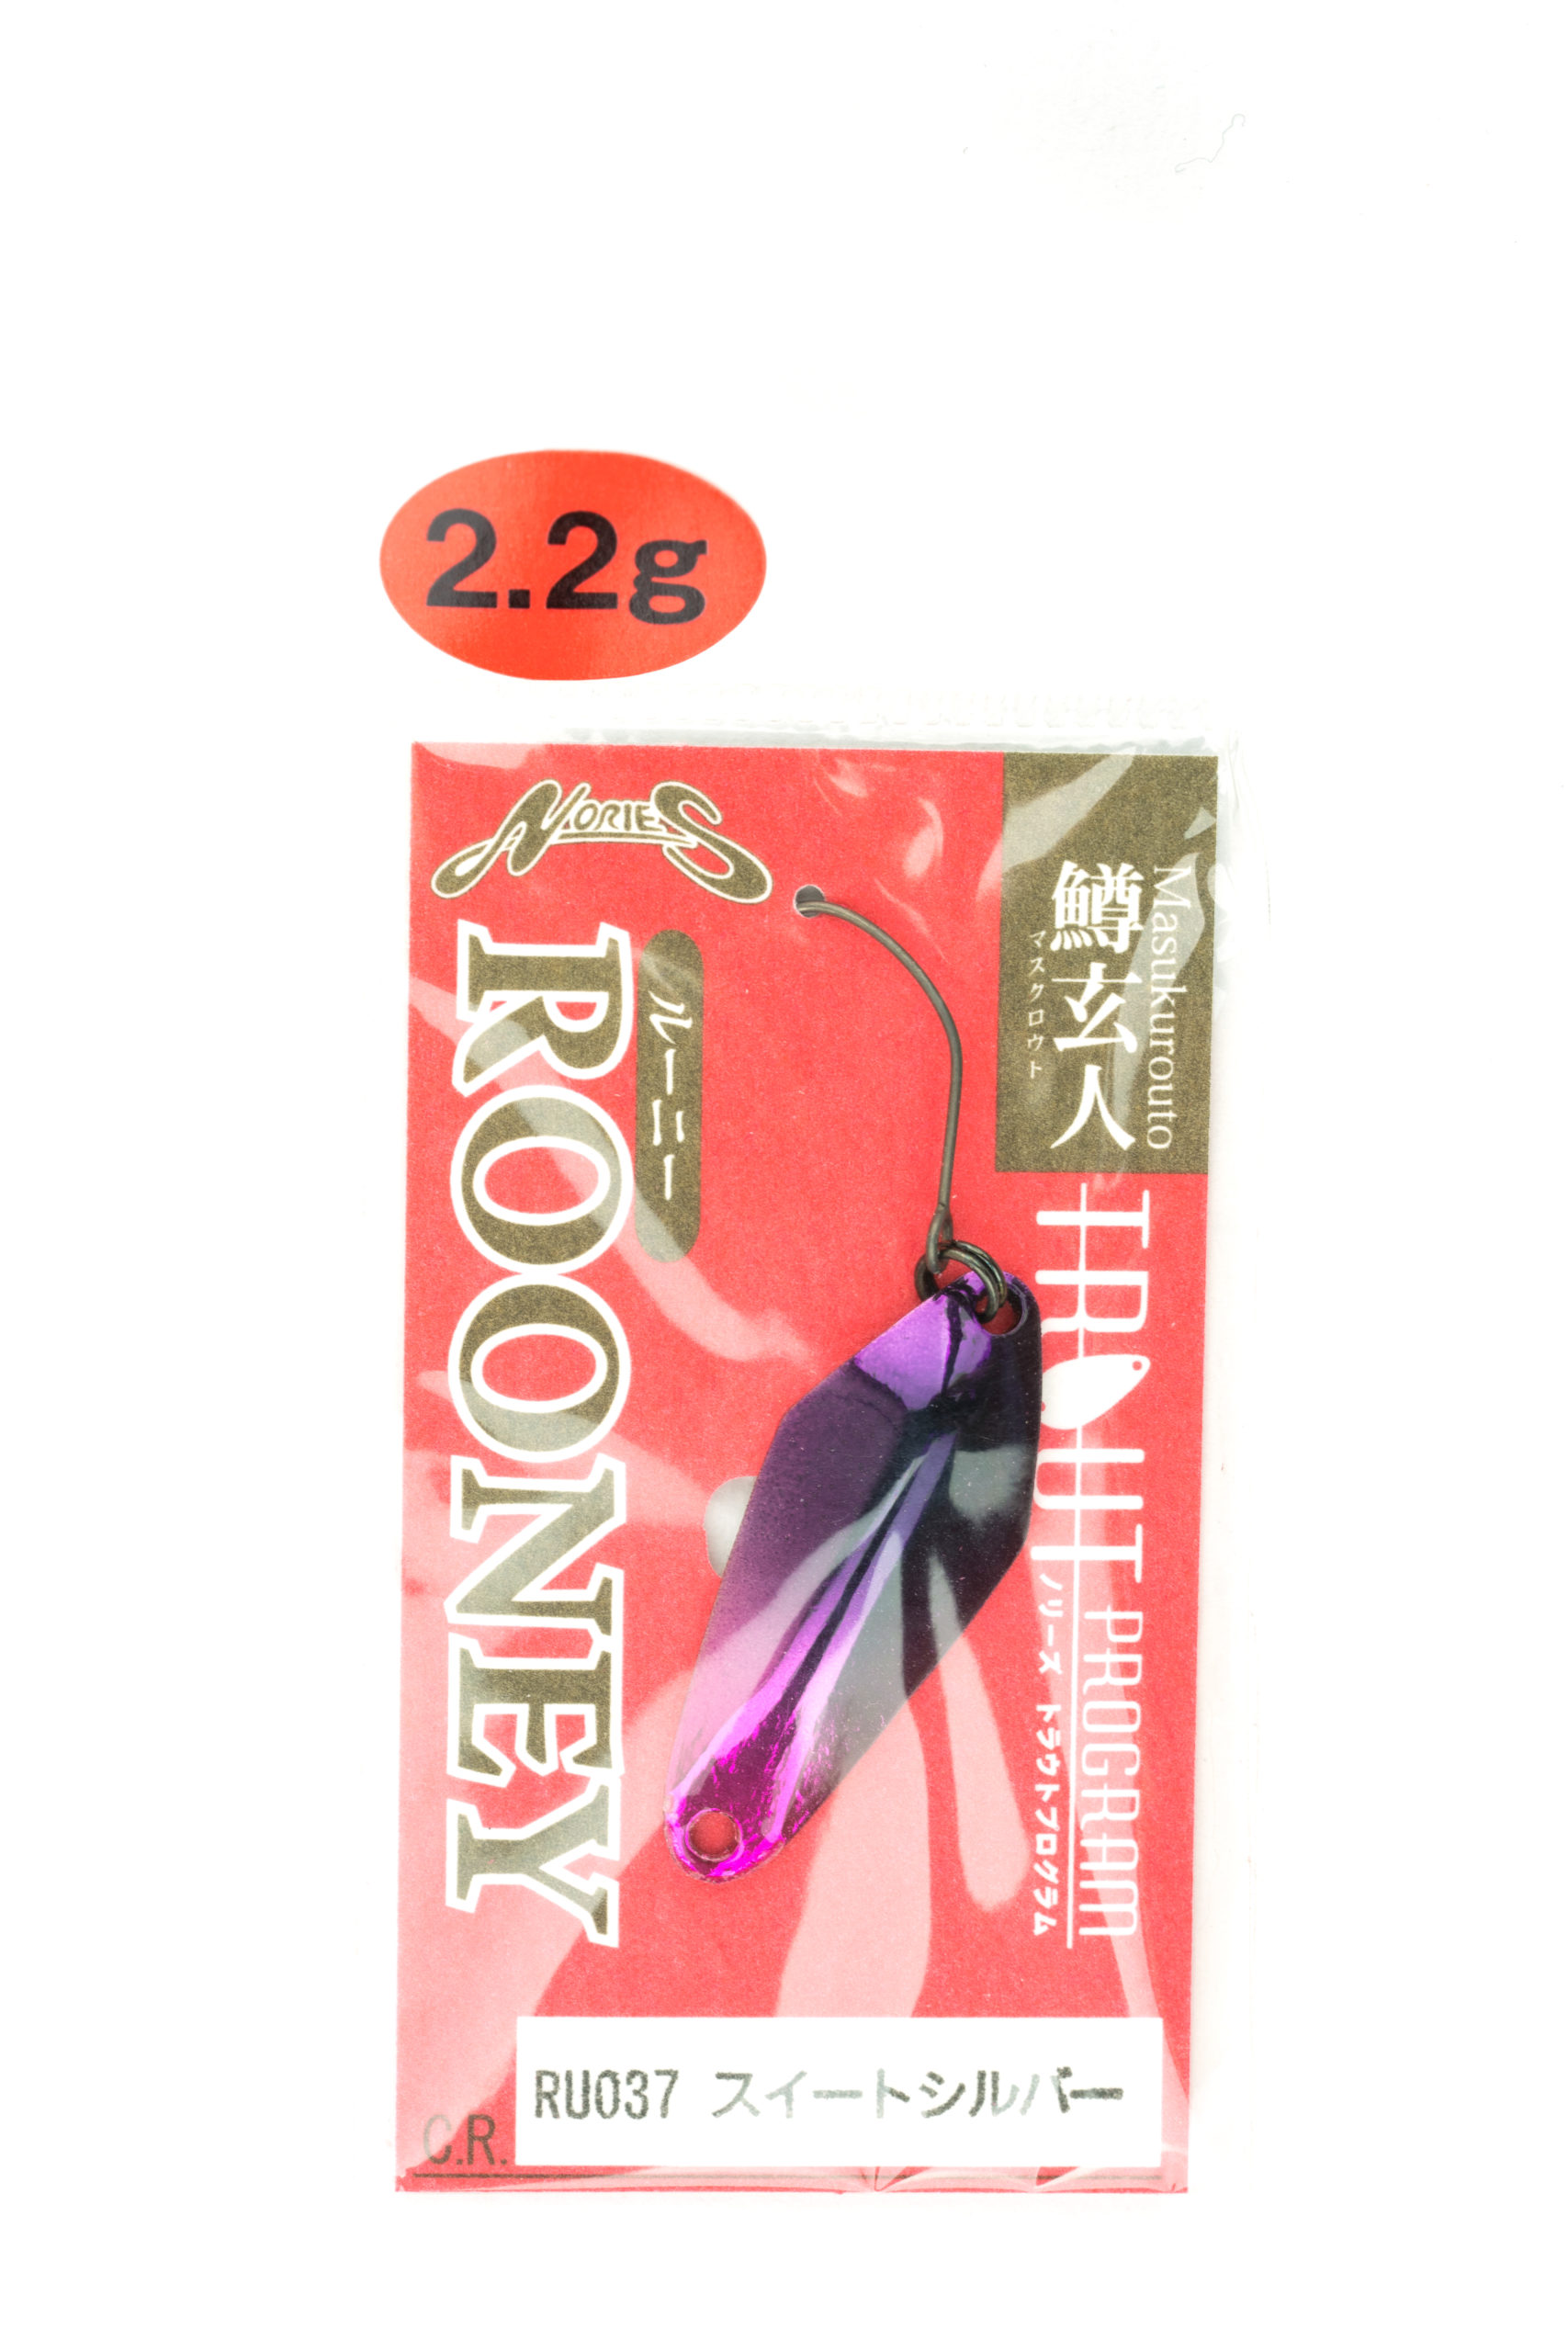 ROONEY NORIES  2,8 GR  IT12 ITALIAN COLOR SILVER BLUE  SPOON AREA TROUT SPINNING